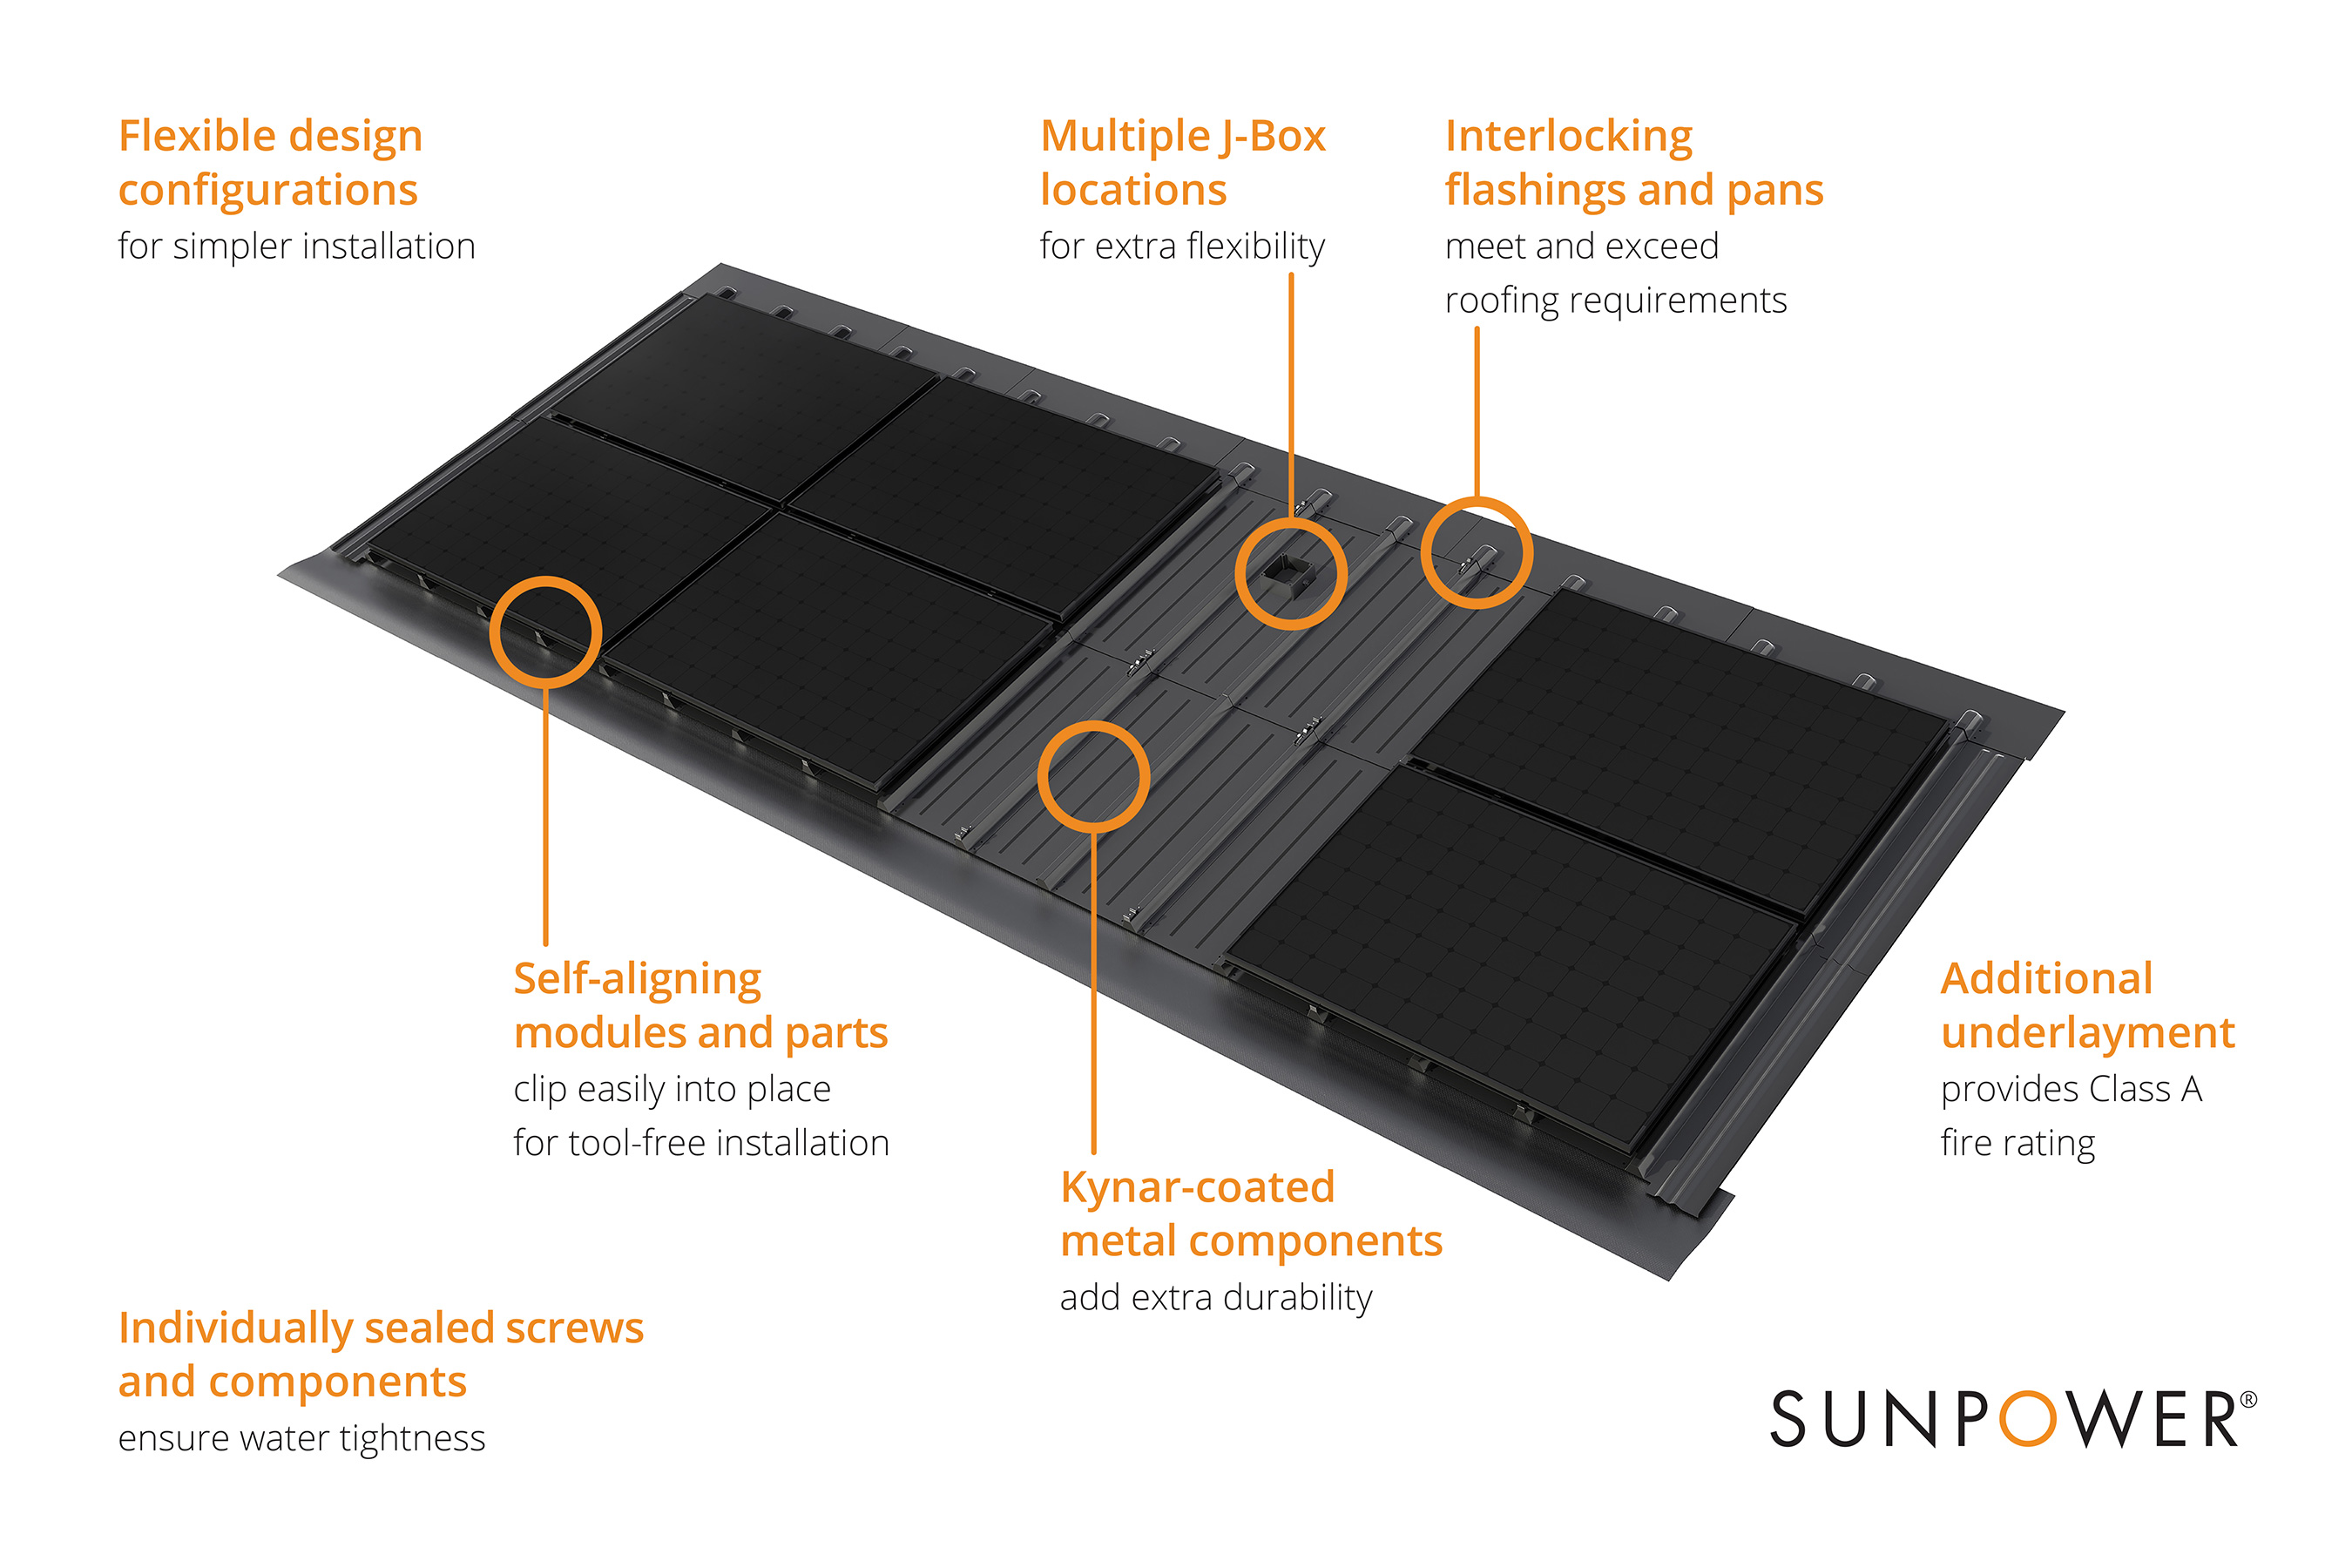 The first-of-its-kind, our OneRoof™ system delivers an efficient, durable and cost-effective solar solution that’s ideal for builders and buyers in the new homes market.